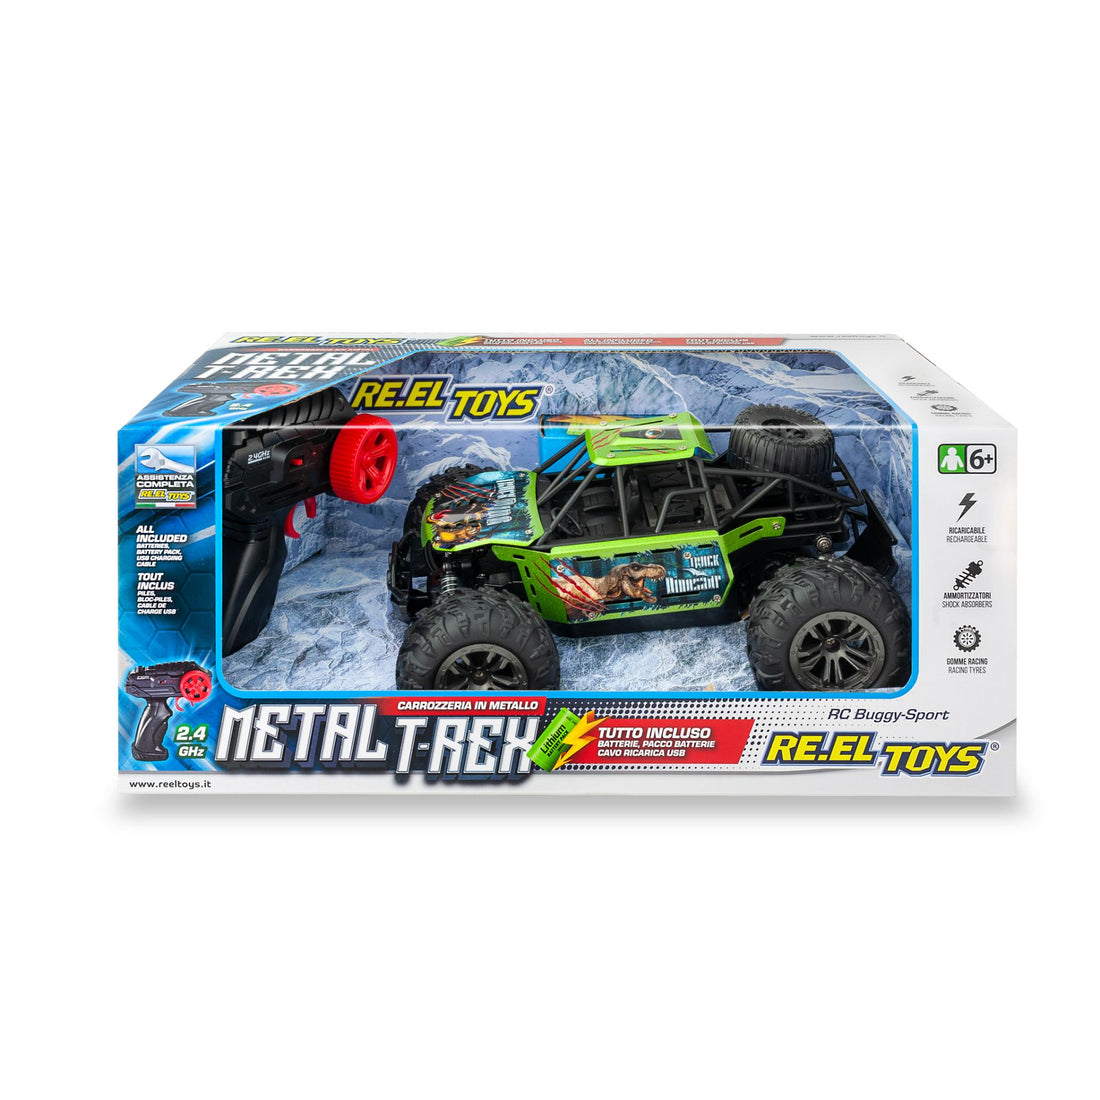 METAL T-REX: Rc 2.4 GHz - Rc 1:16 Scale METAL CARBODY  - with shock absorbers - differential - front and rear bumpers - with lithium battery pack + USB charging cable + batteries for the transmitter included